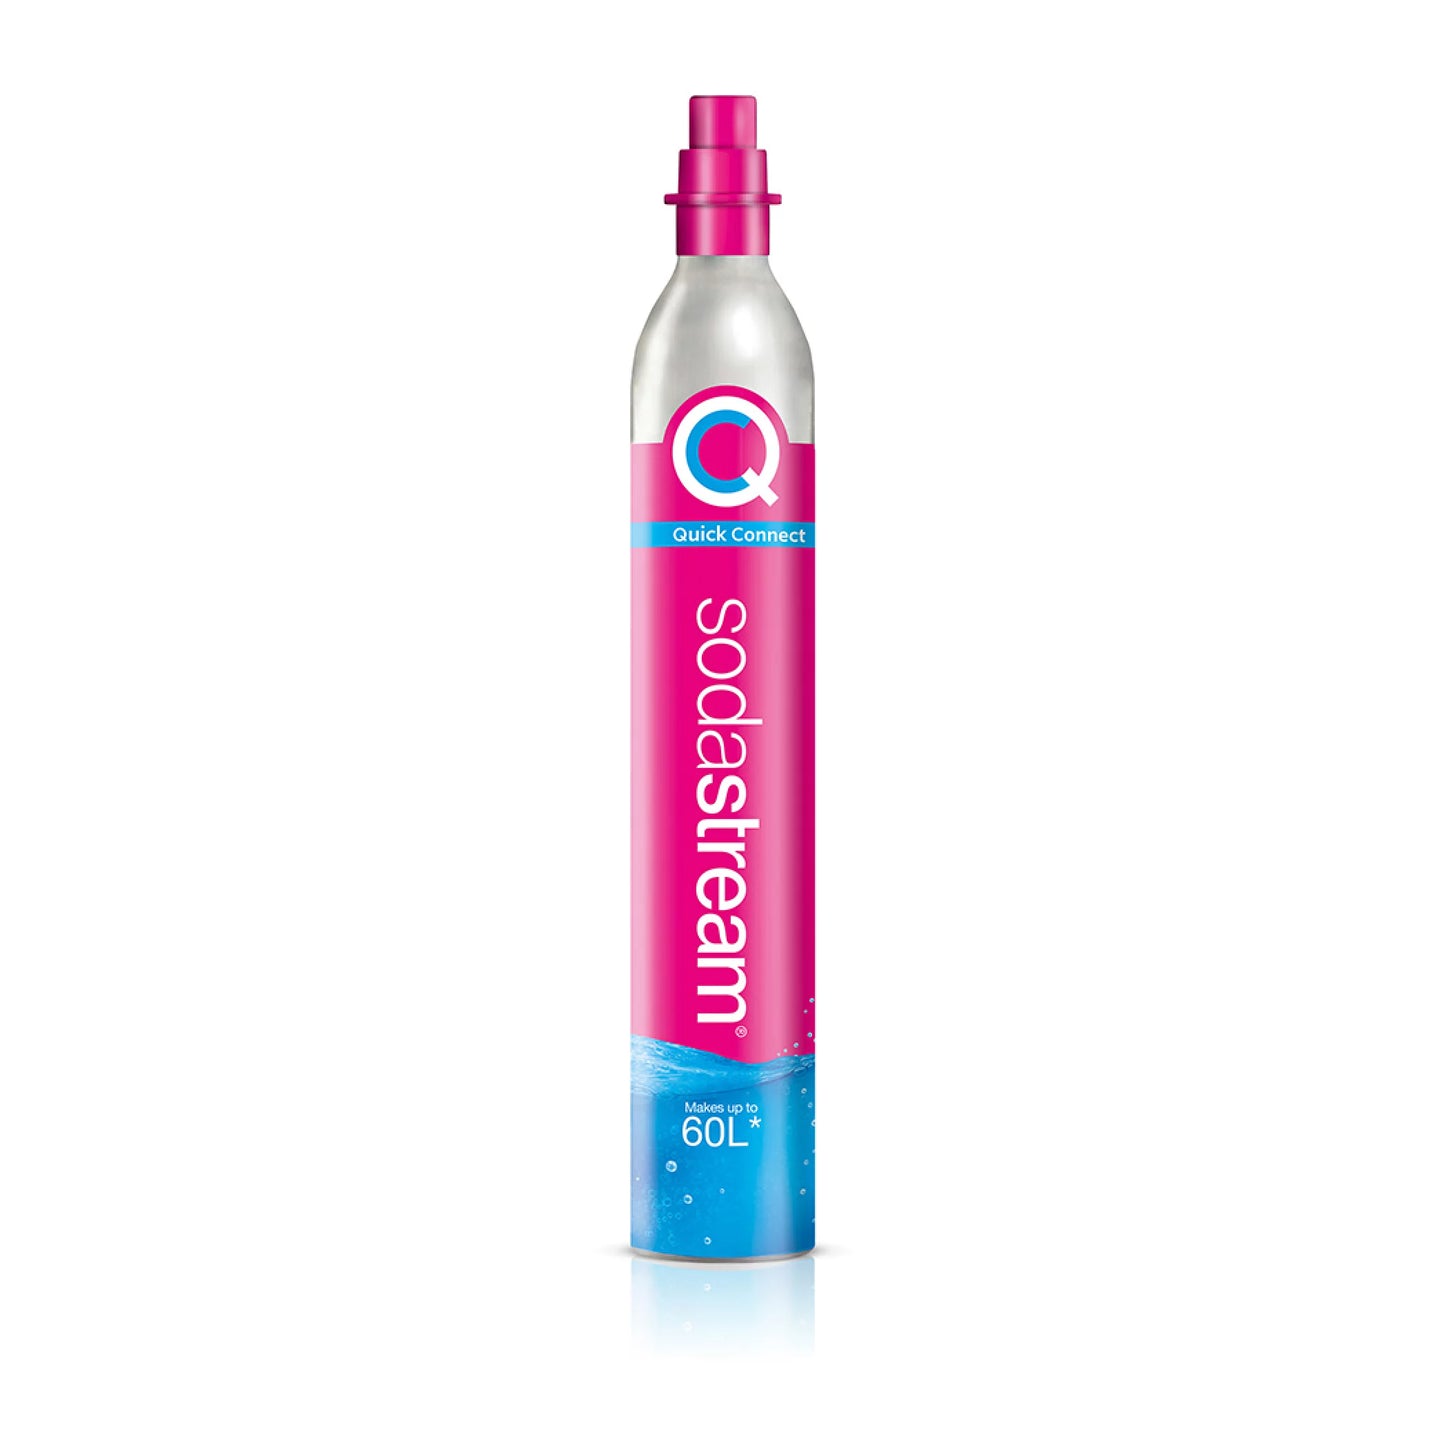 SodaStream Quick-Connect Carbon-dioxide cylinder